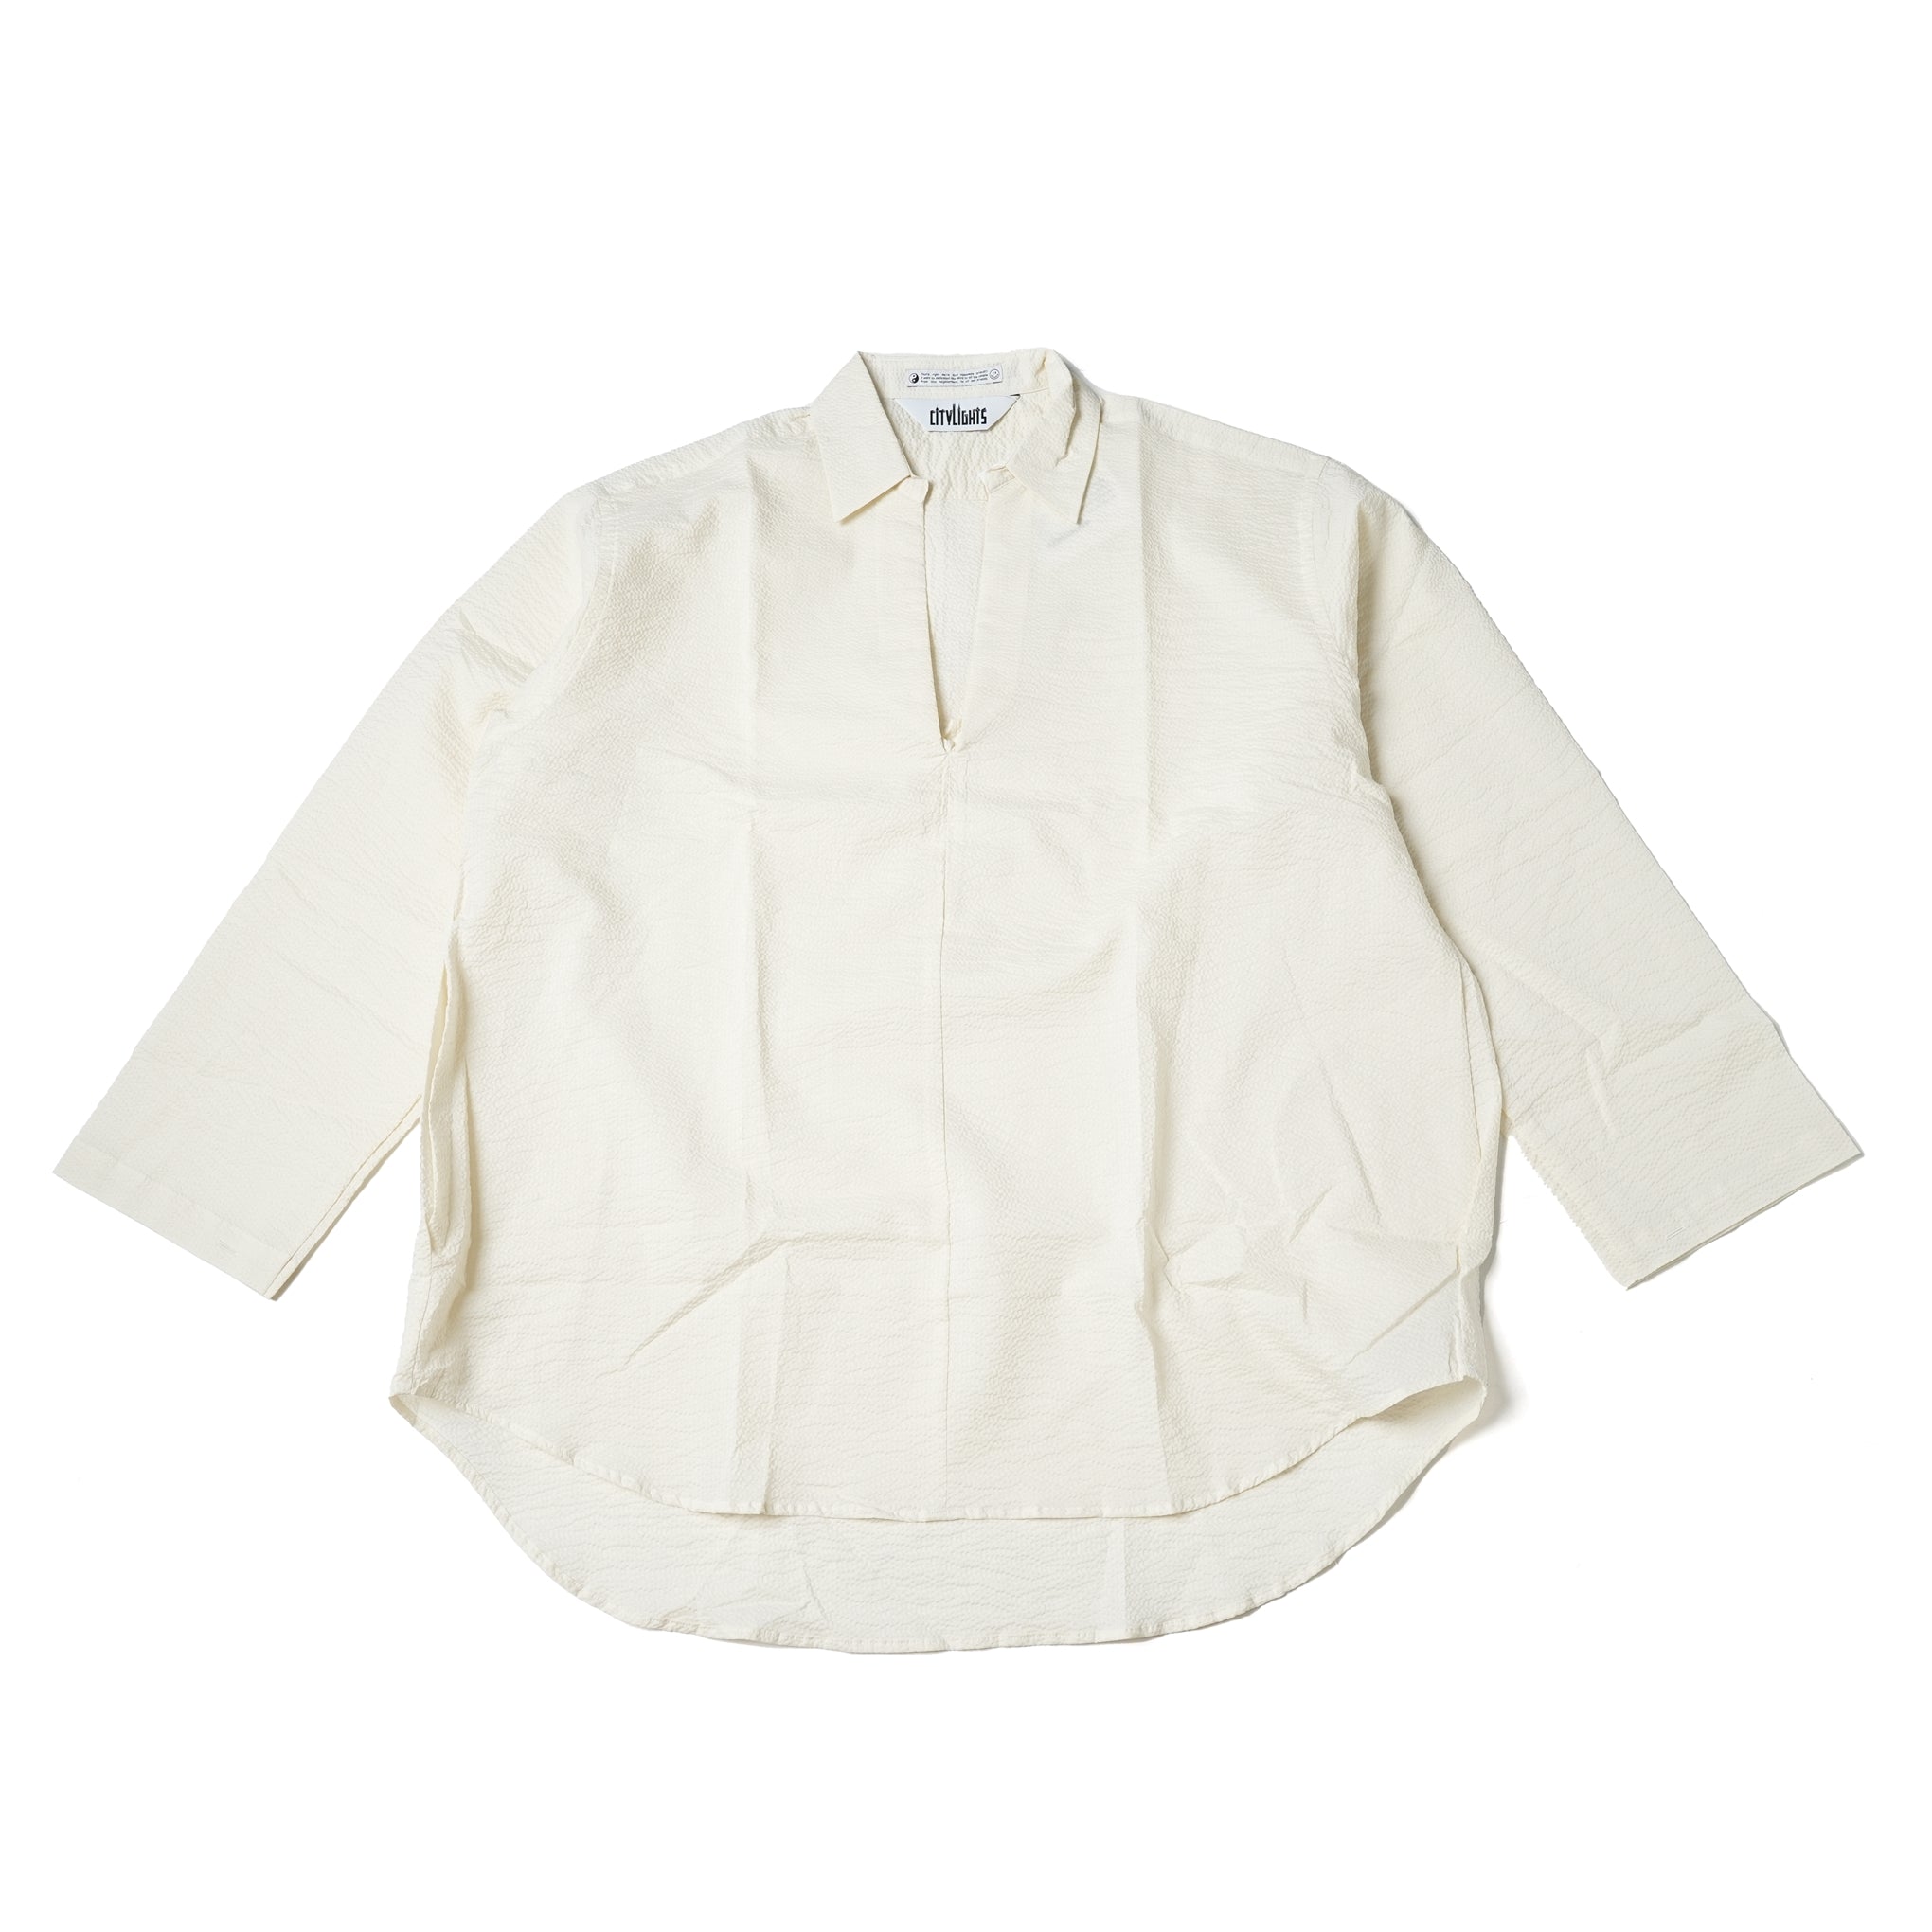 Name: MEX KAFTAN SHIRT | Color:Ivory Ripple | Size:One 【CITYLIGHTS PRODUCTS_シティライツプロダクツ】